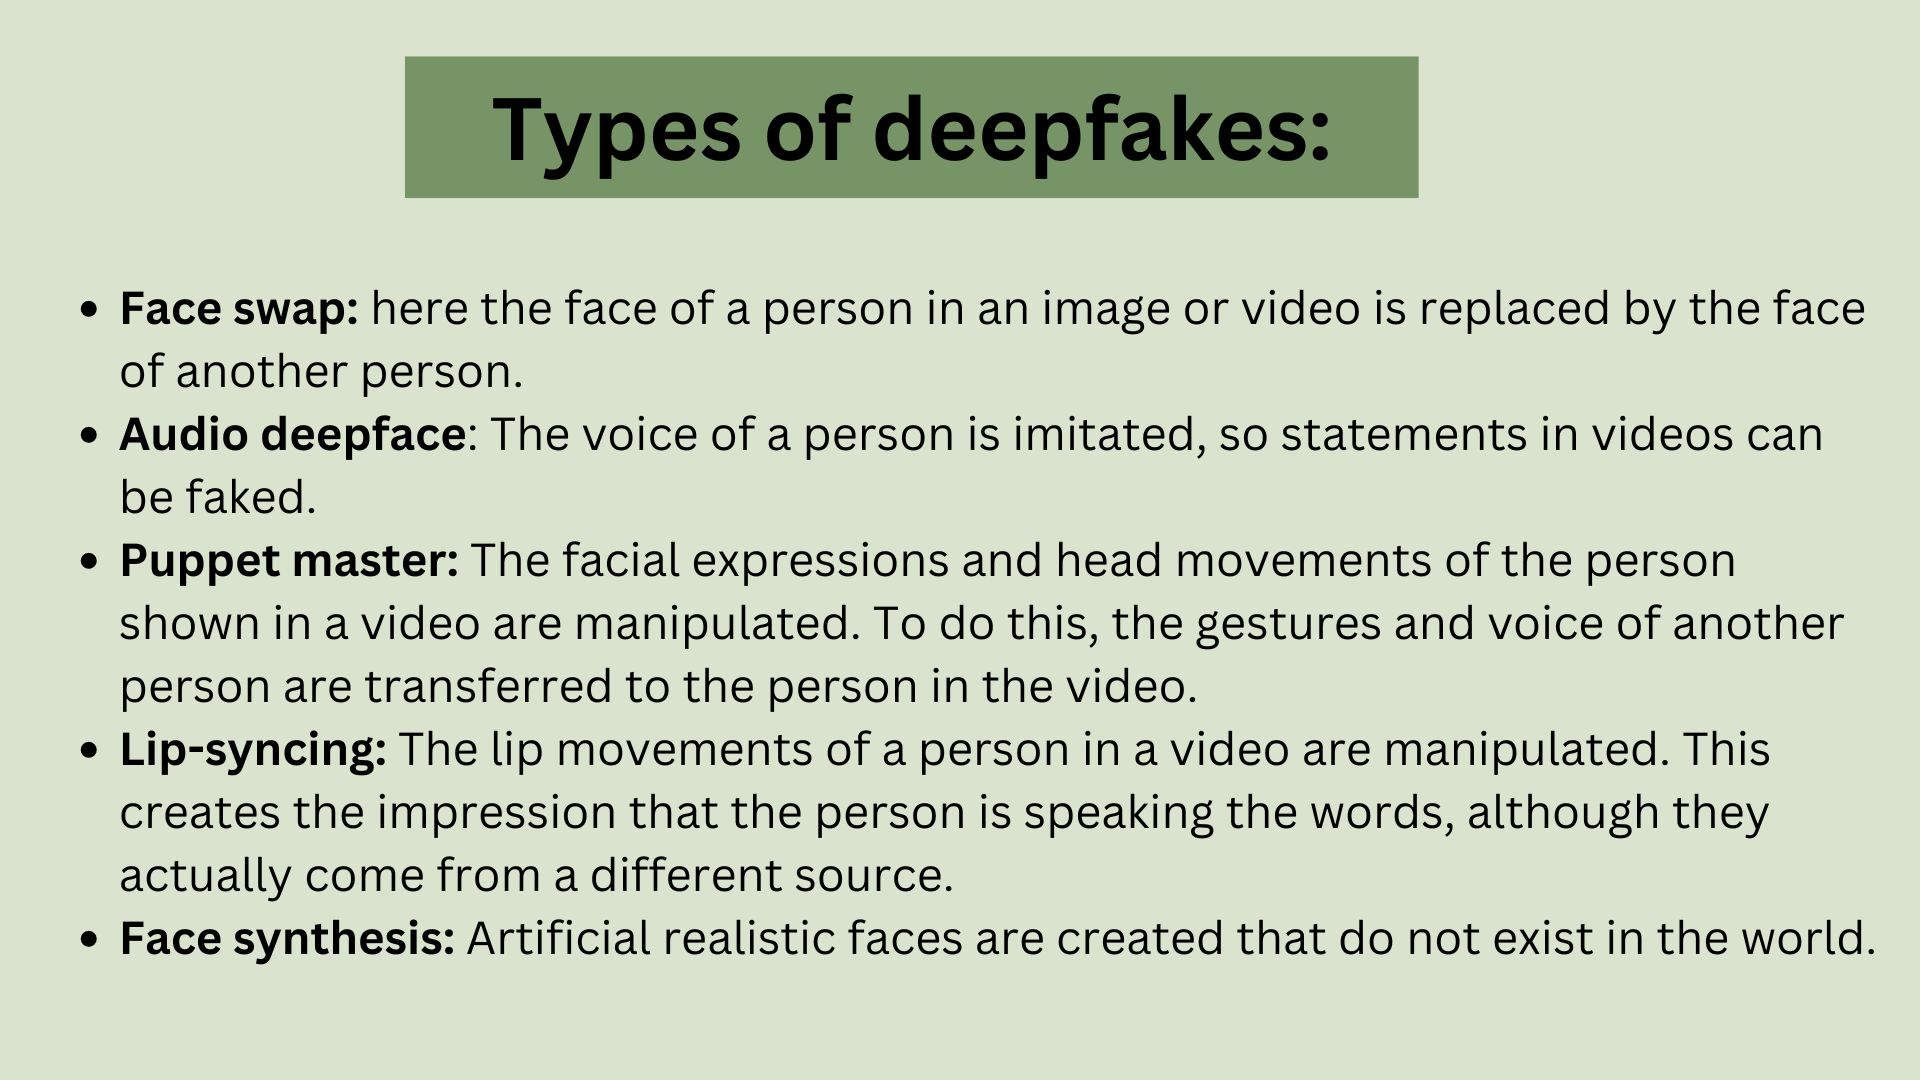 uploads/6700/types_of_deepfakes.png